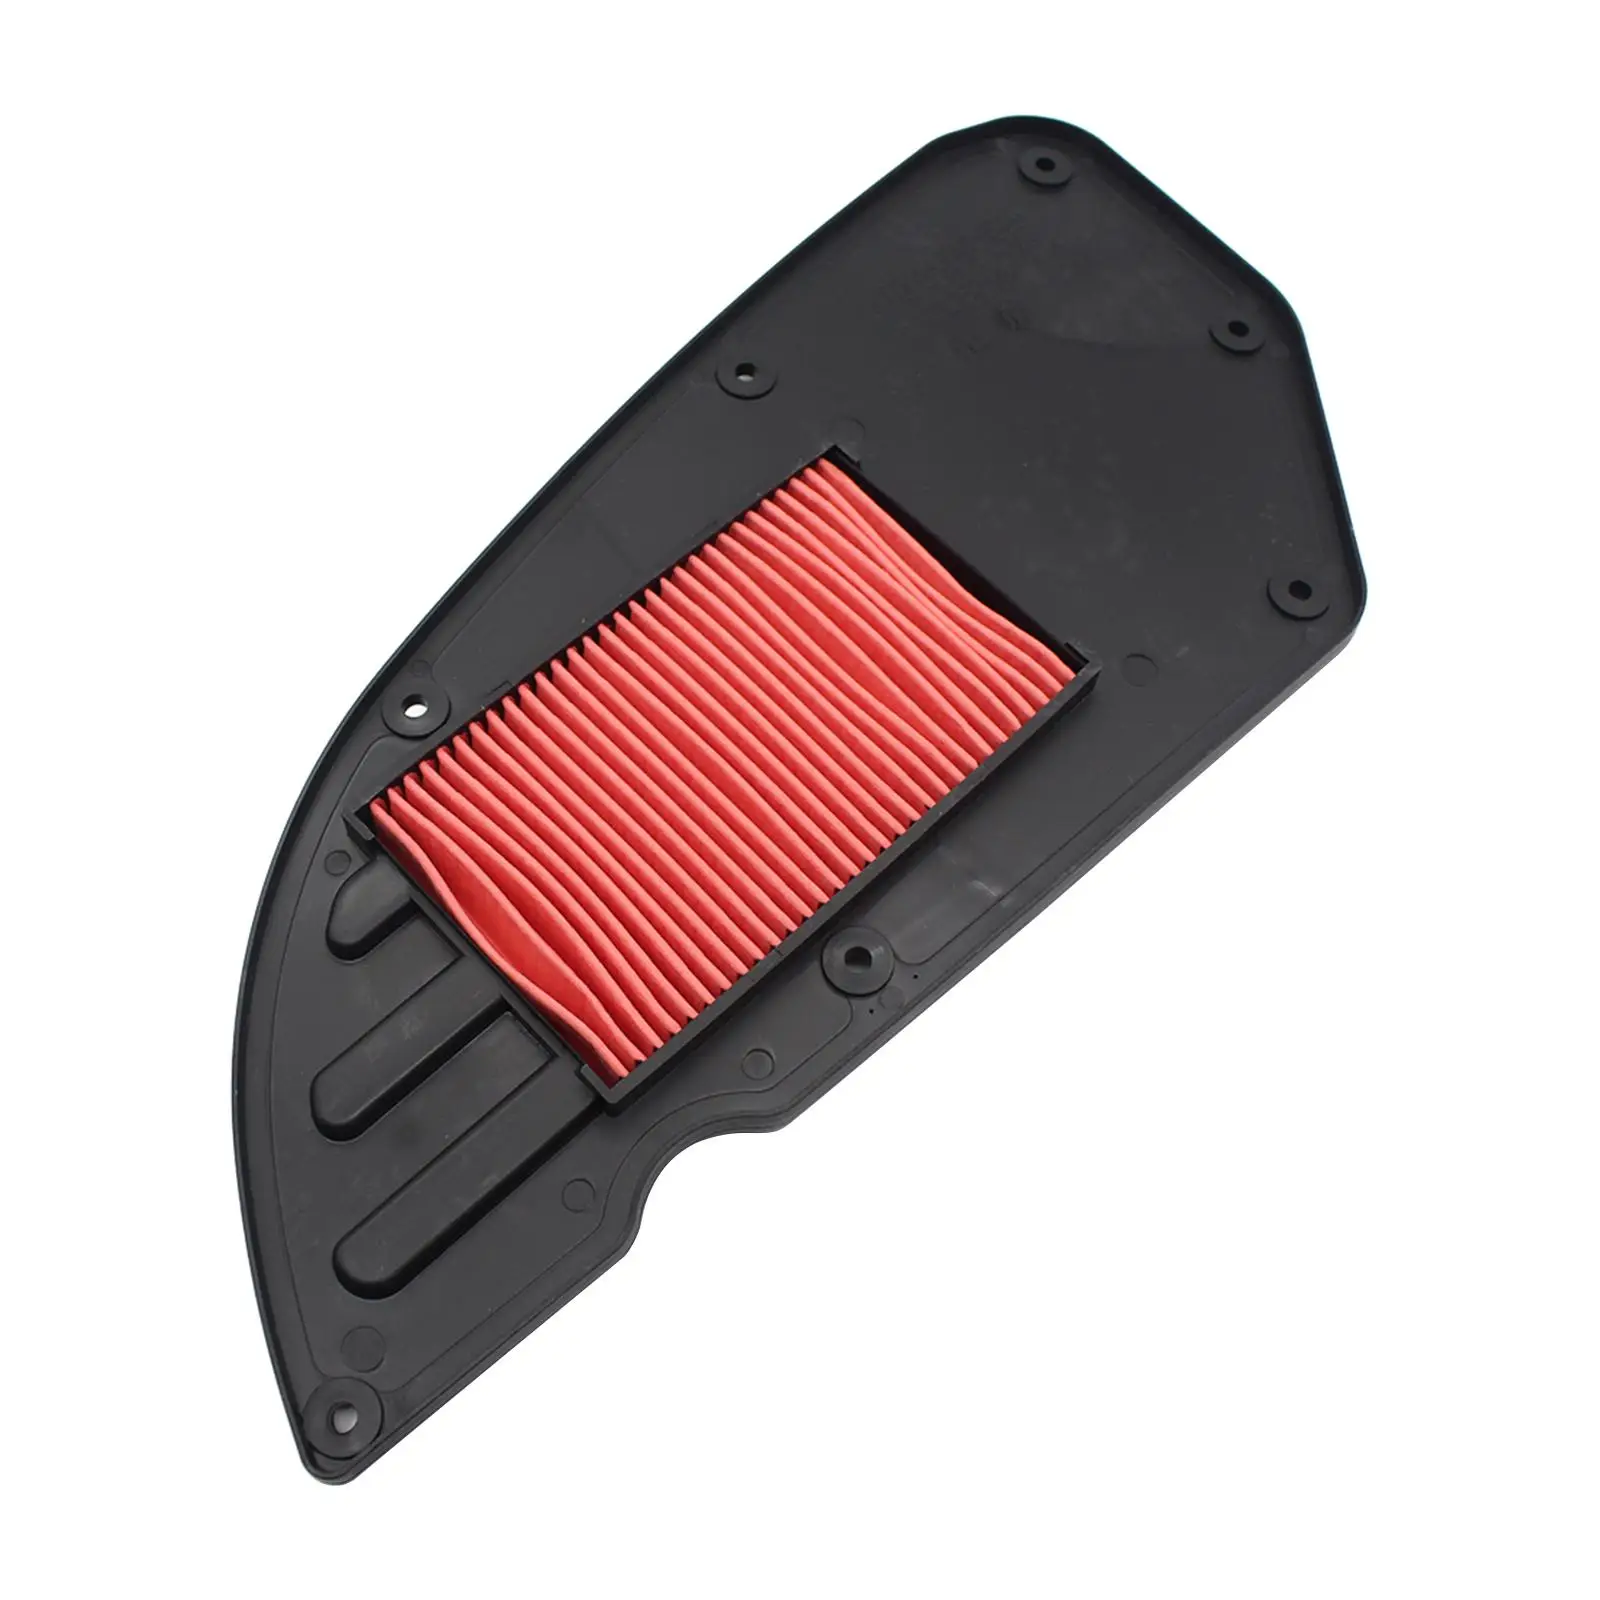 Motorcycle Air Filter Cleaner, for Downtown 350 350i E4 09 -16